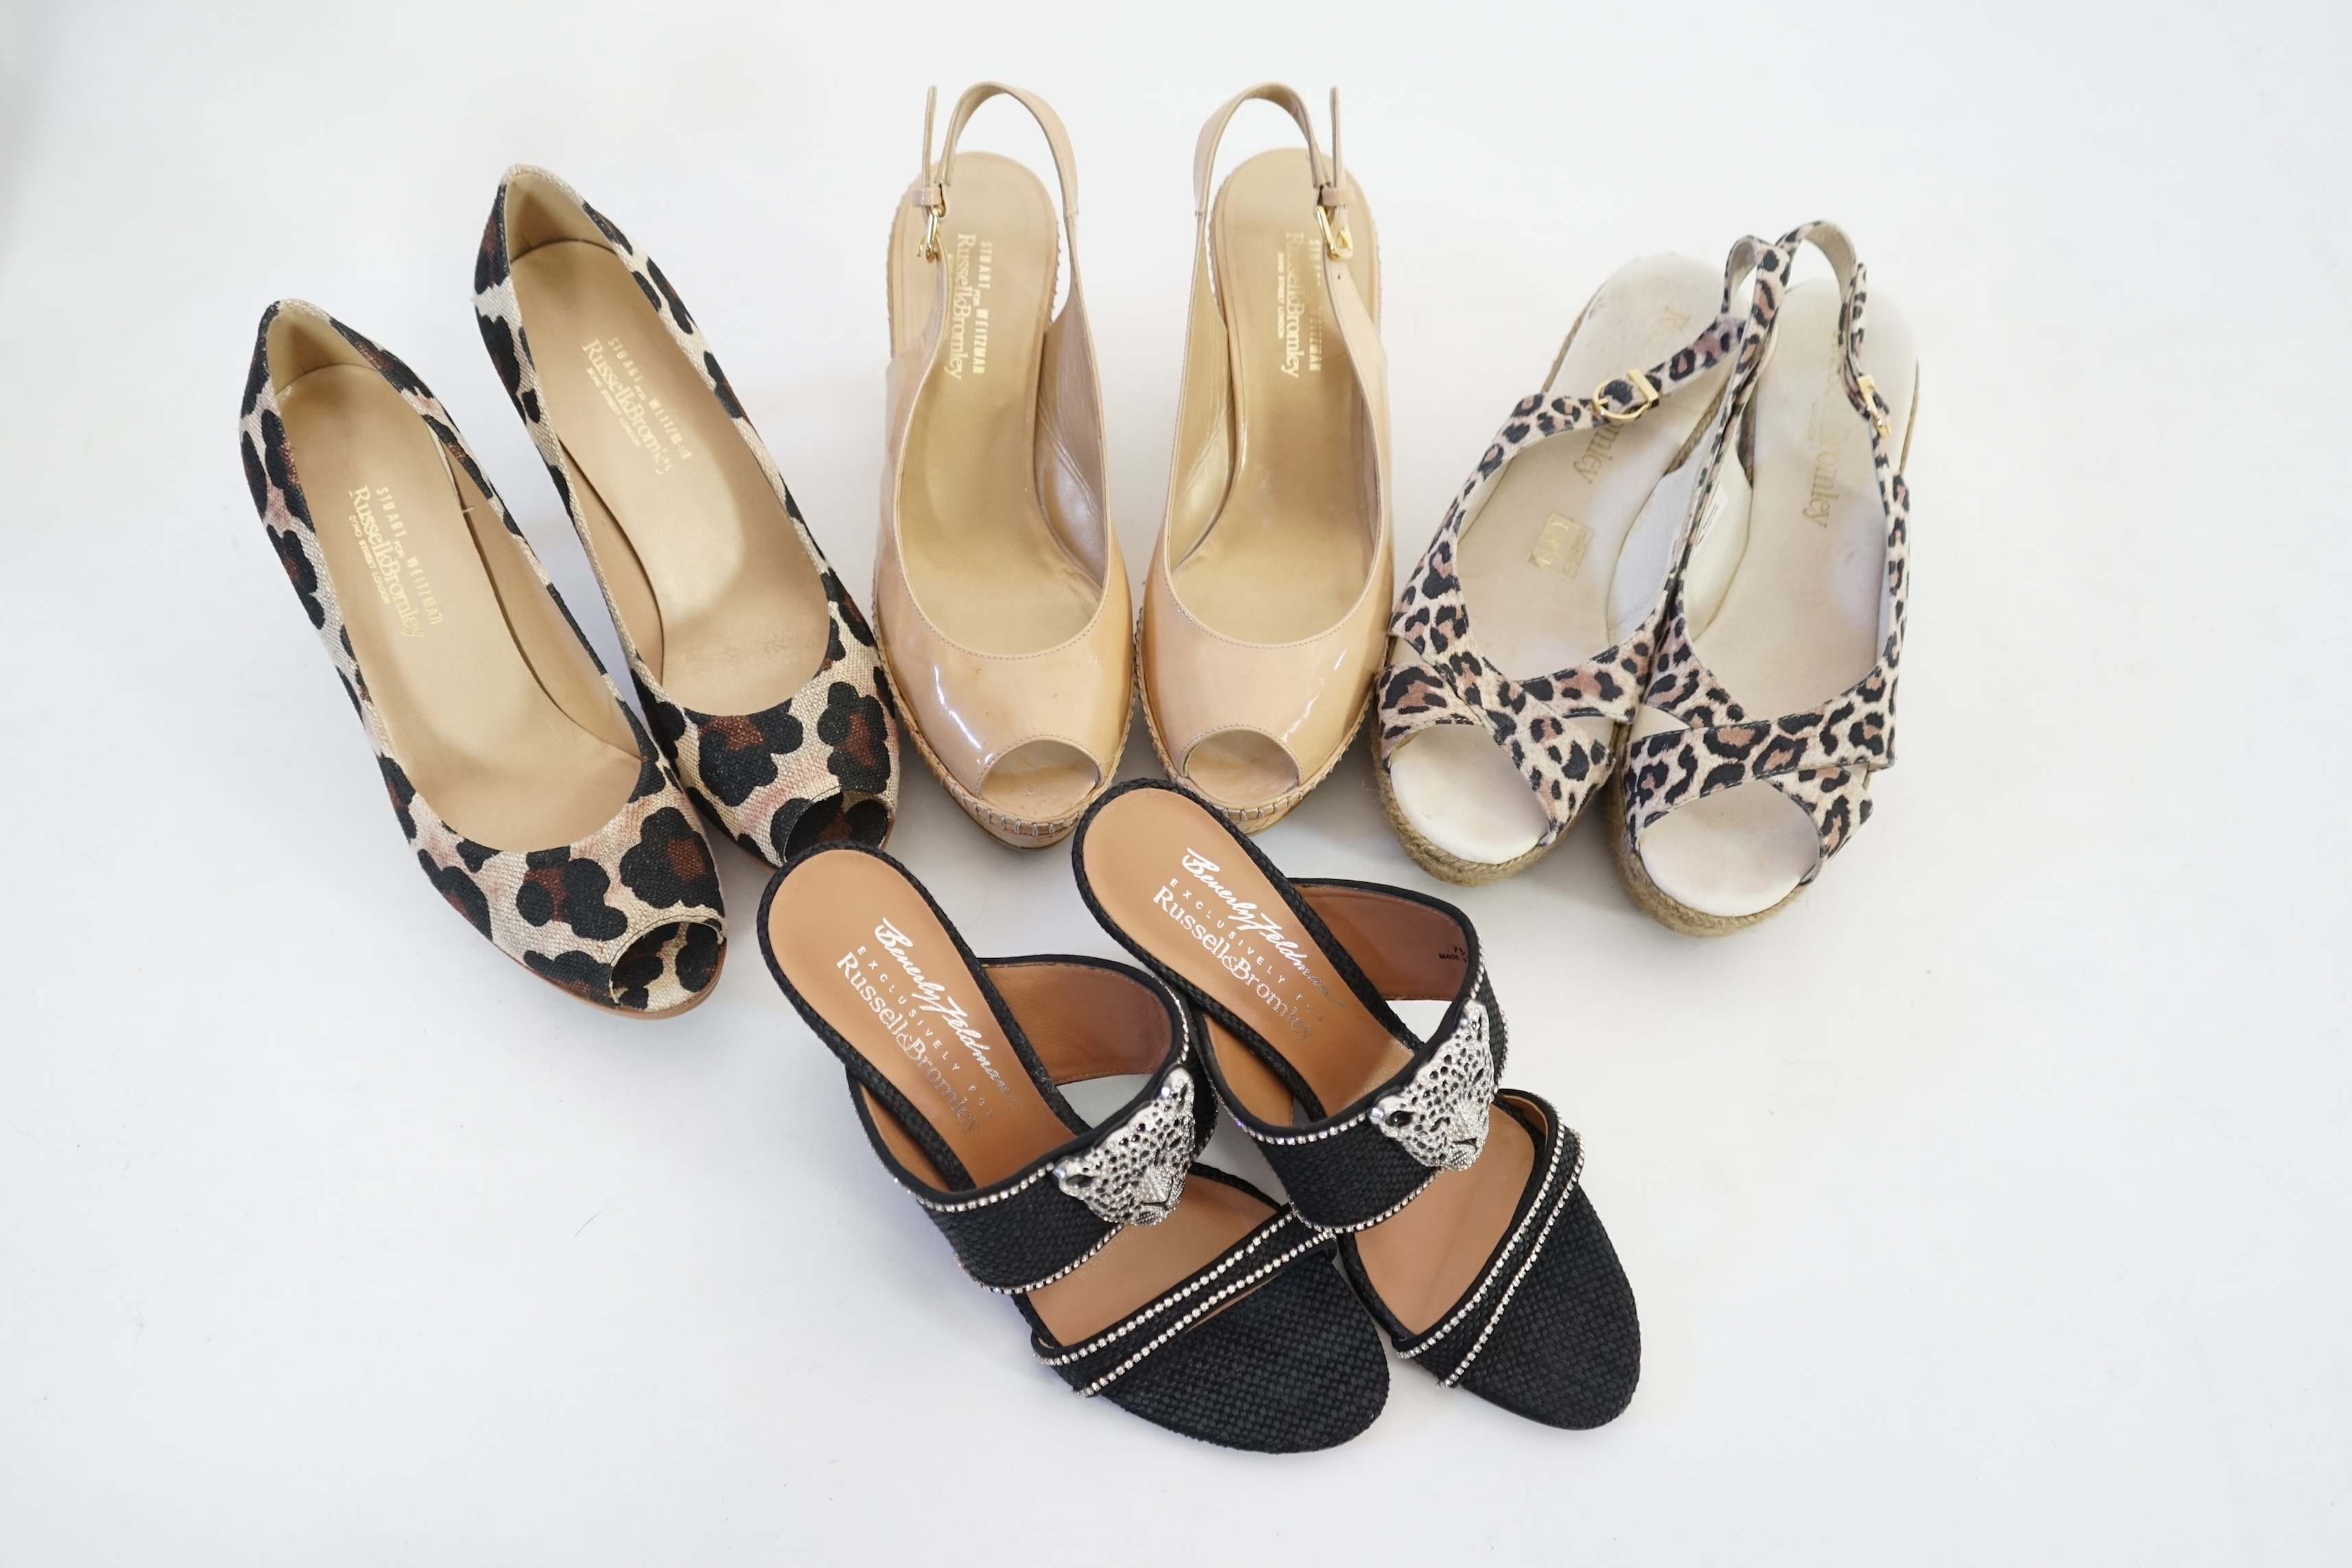 Four pairs of Russell & Bromley lady's heeled sandals, all size 38/38.5. Proceeds to Happy Paws Puppy Rescue